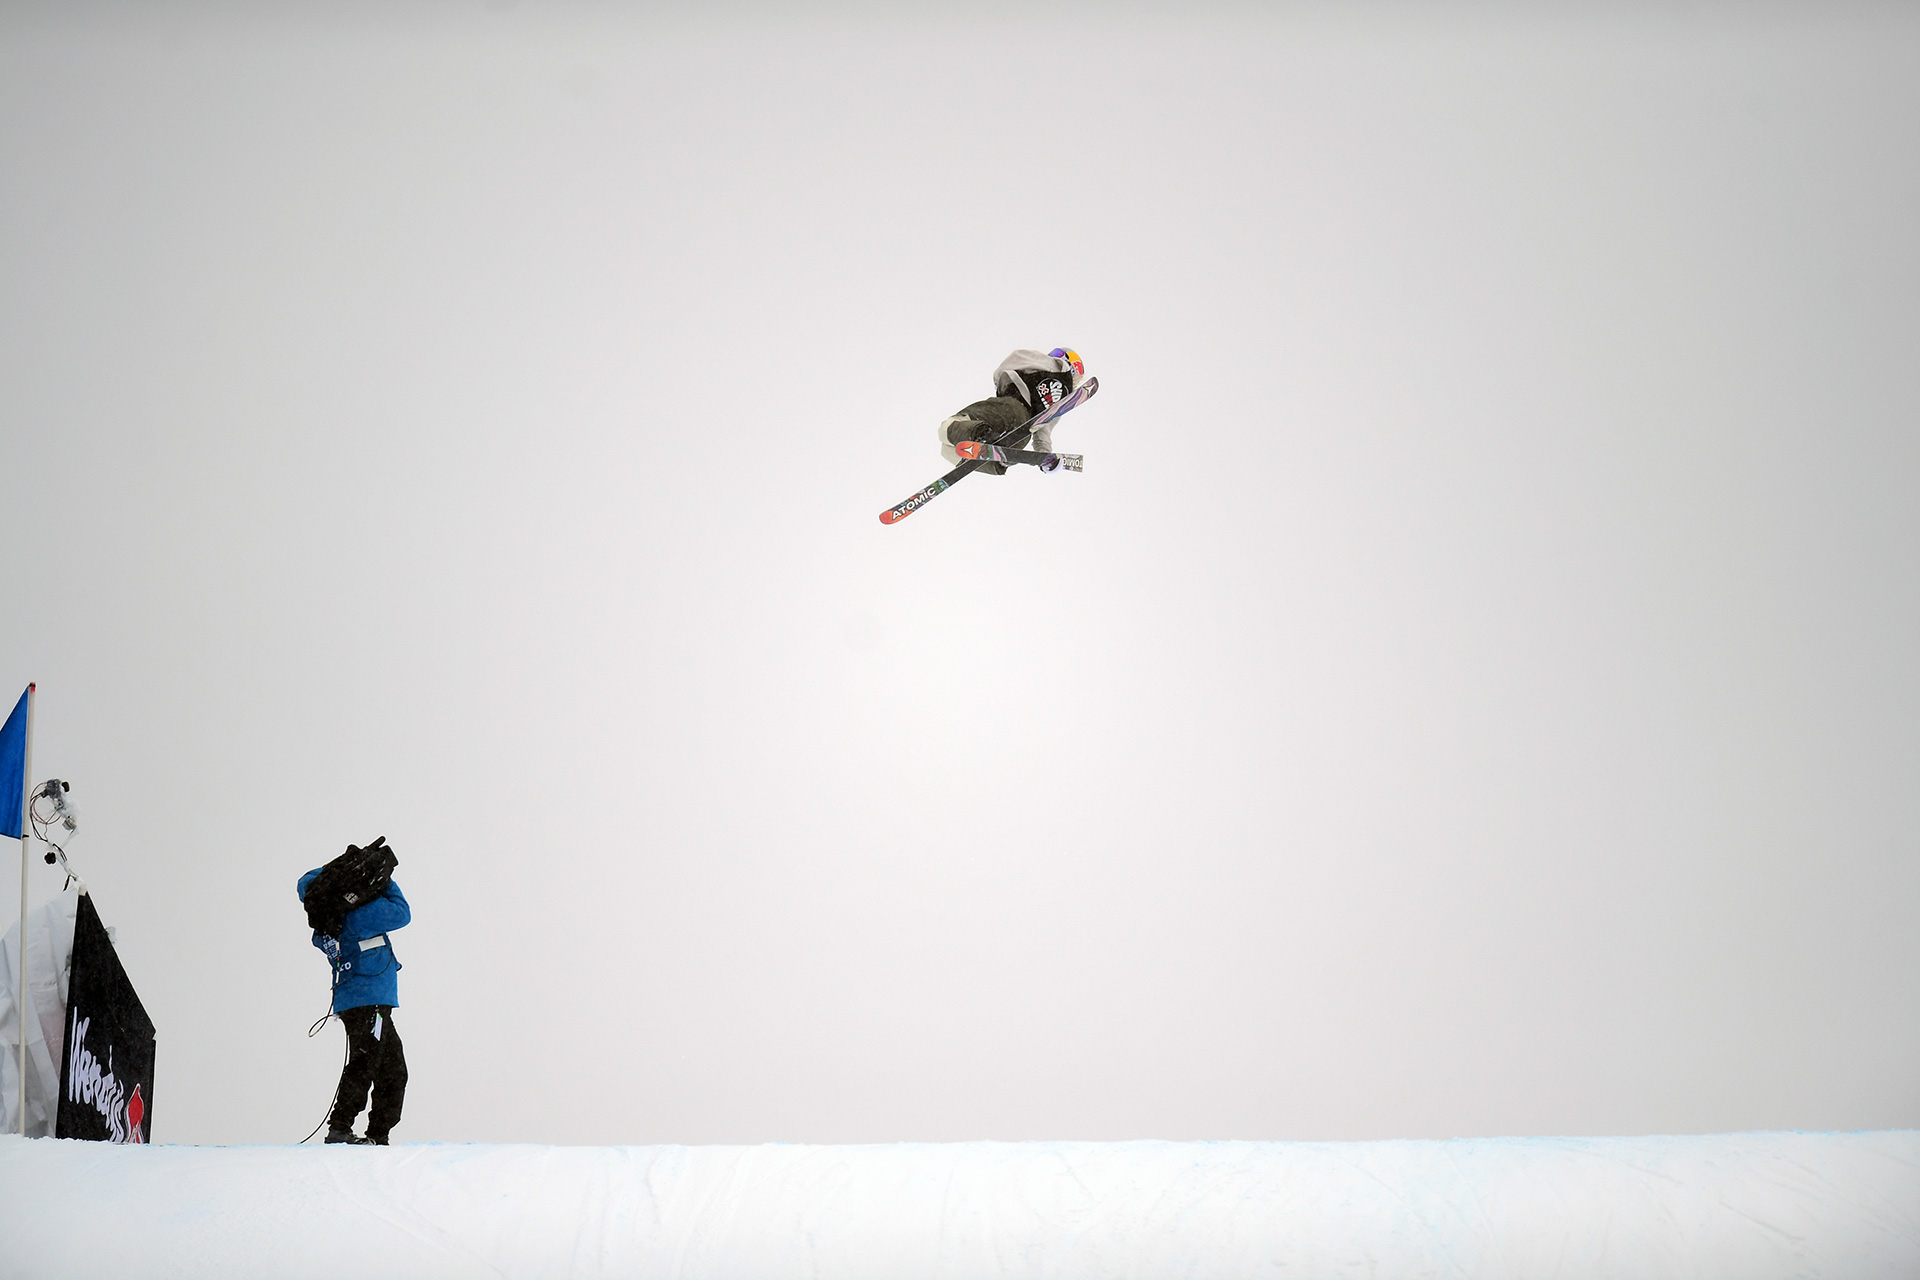 Tess Ledeux lands a worlds first double cork 1620 to win the 2022 Winter X Games Big Air